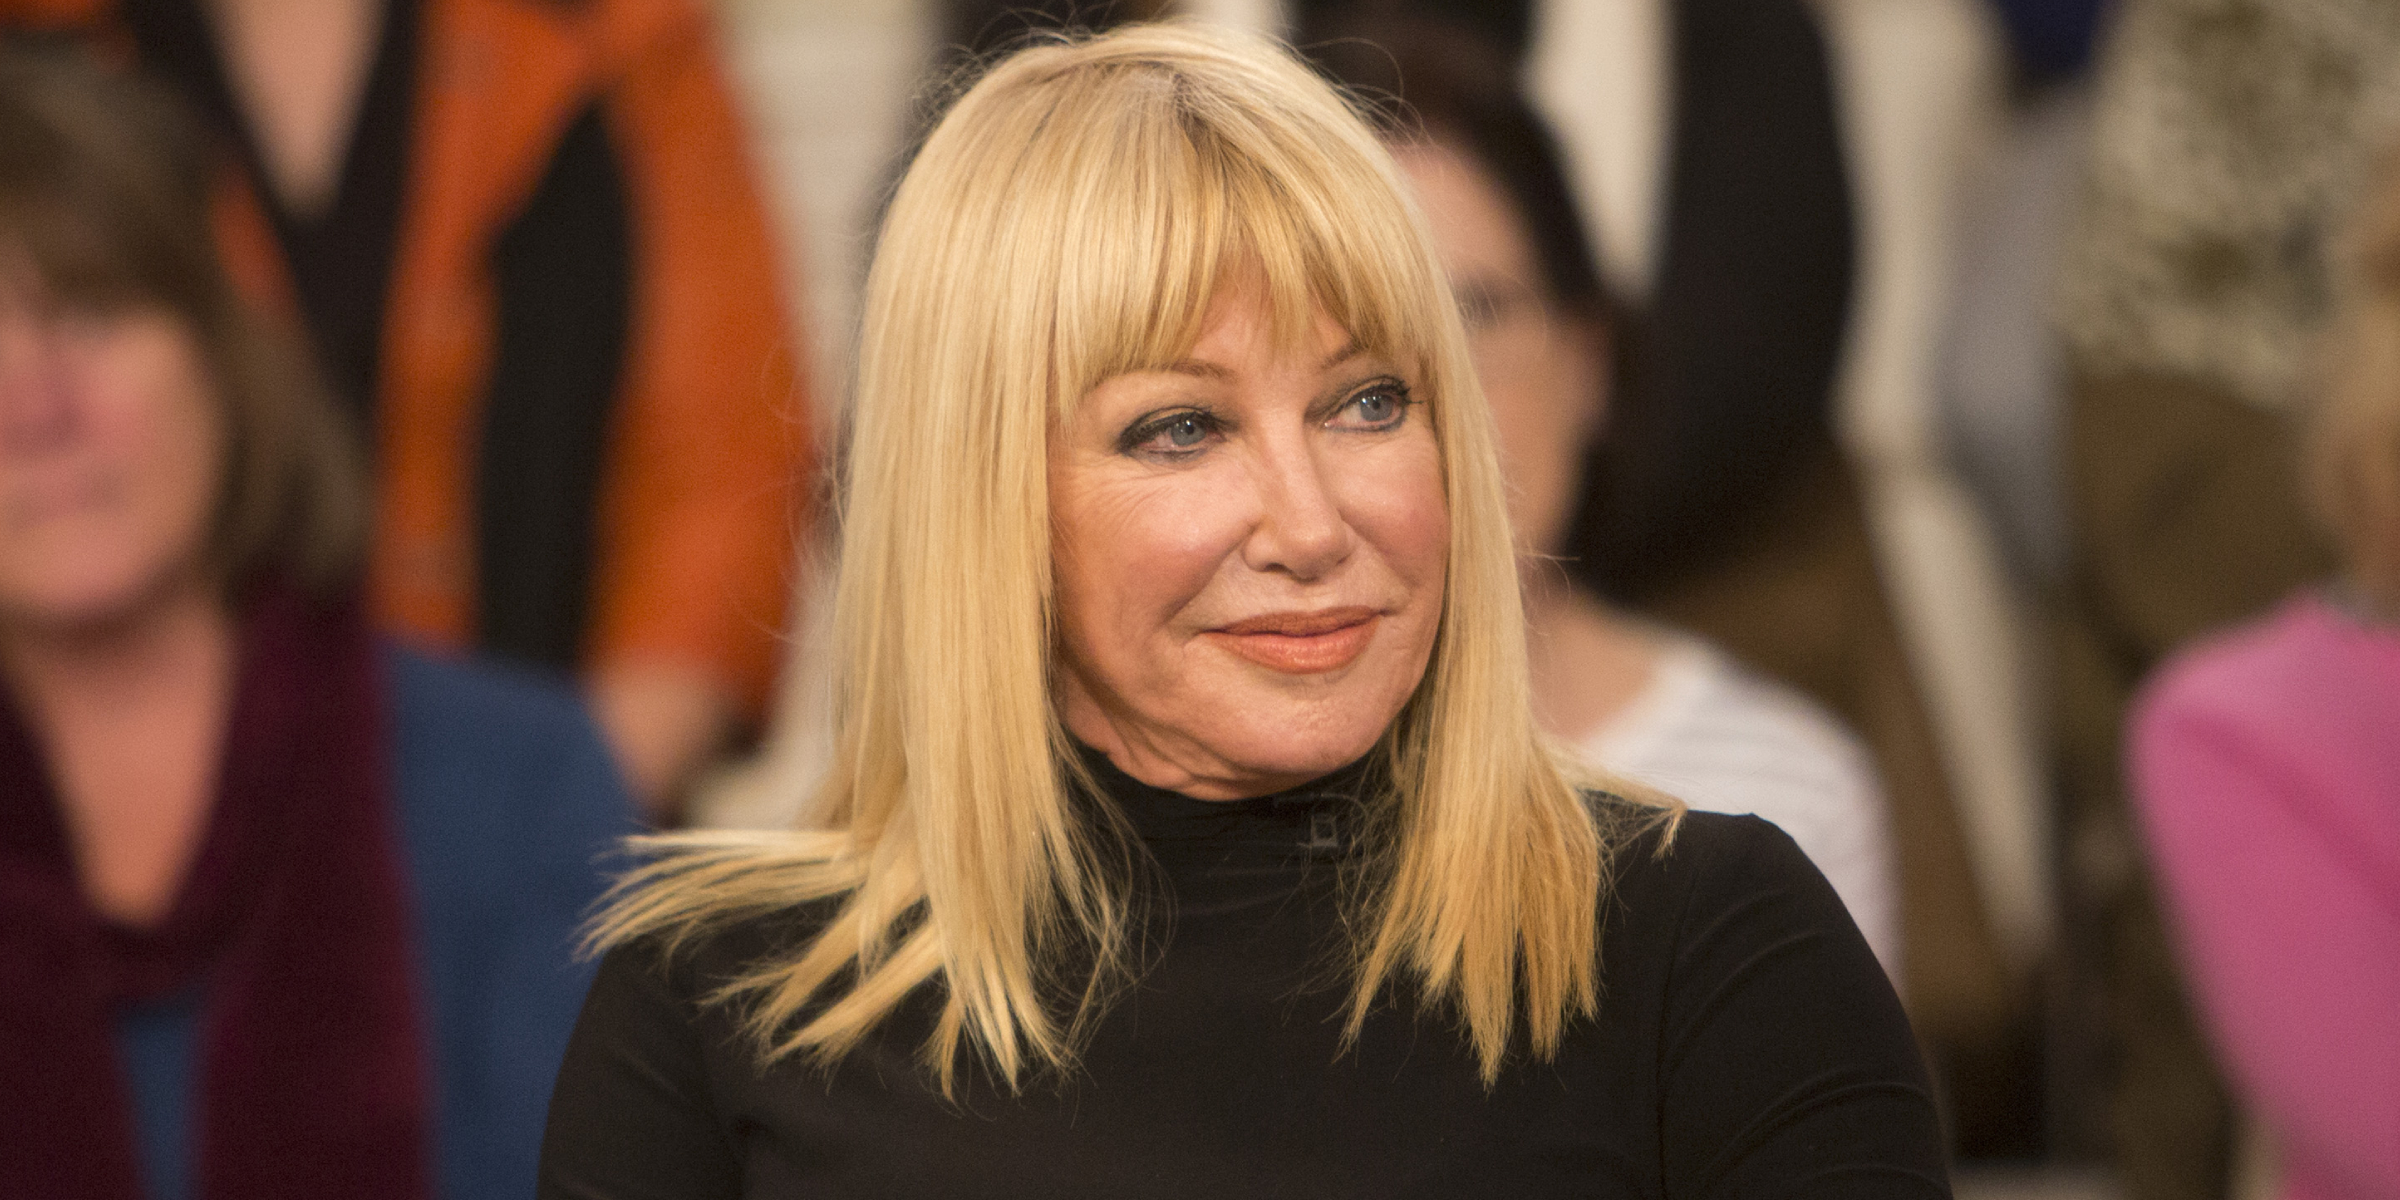 Suzanne Somers | Source: Getty Images